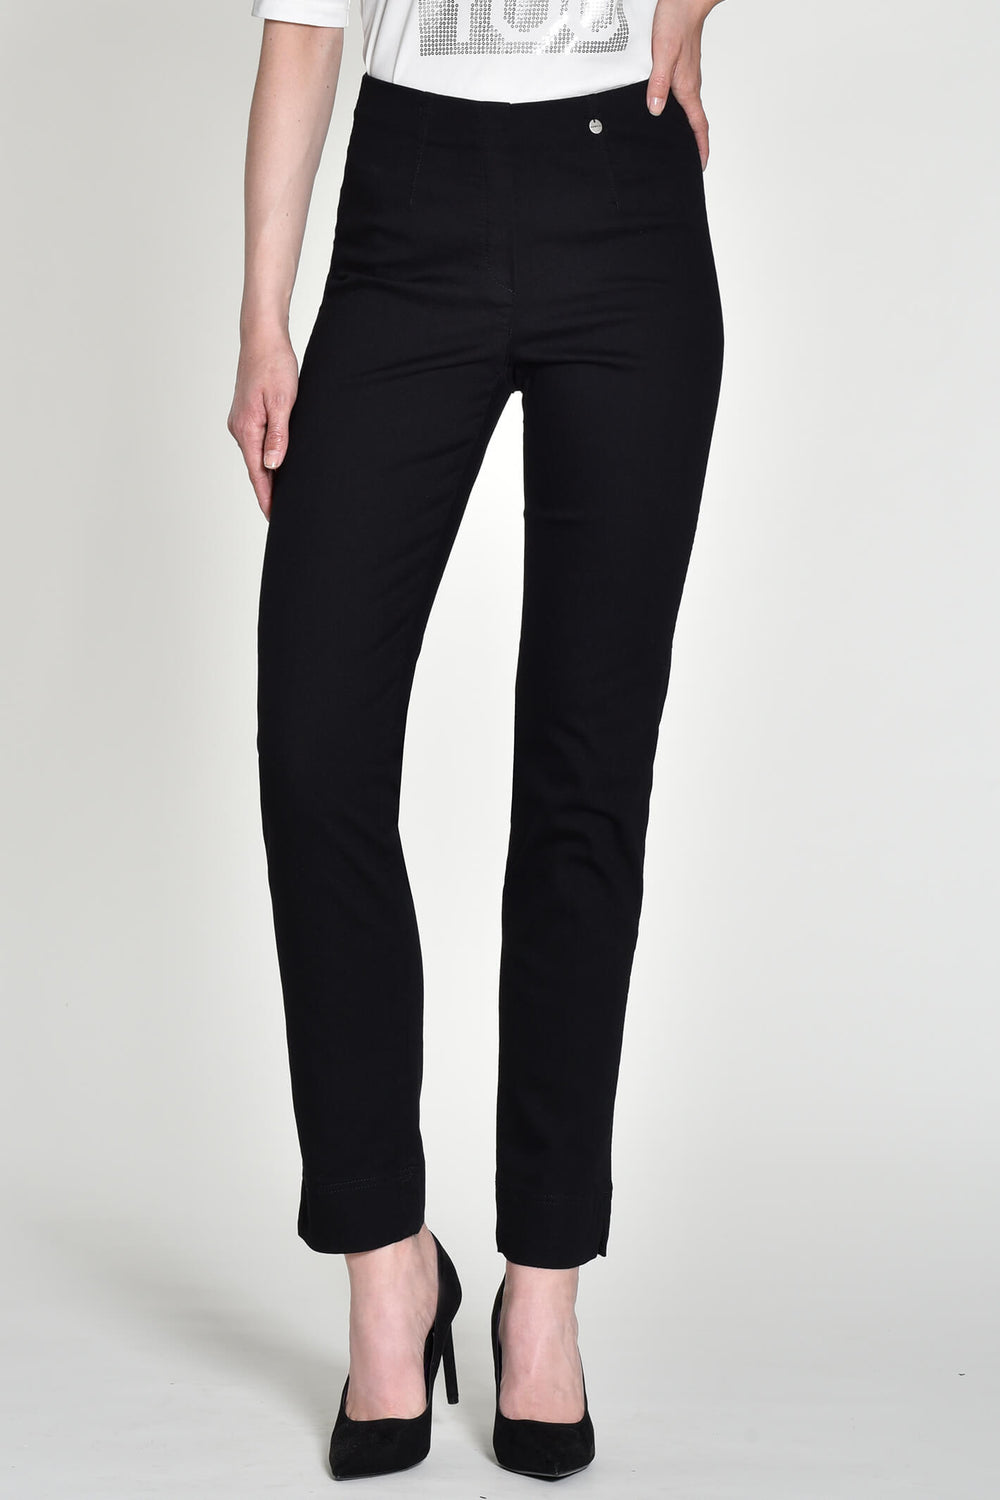 Robell 51639 90 Black Marie Stretch Denim Trousers - Experience Boutique